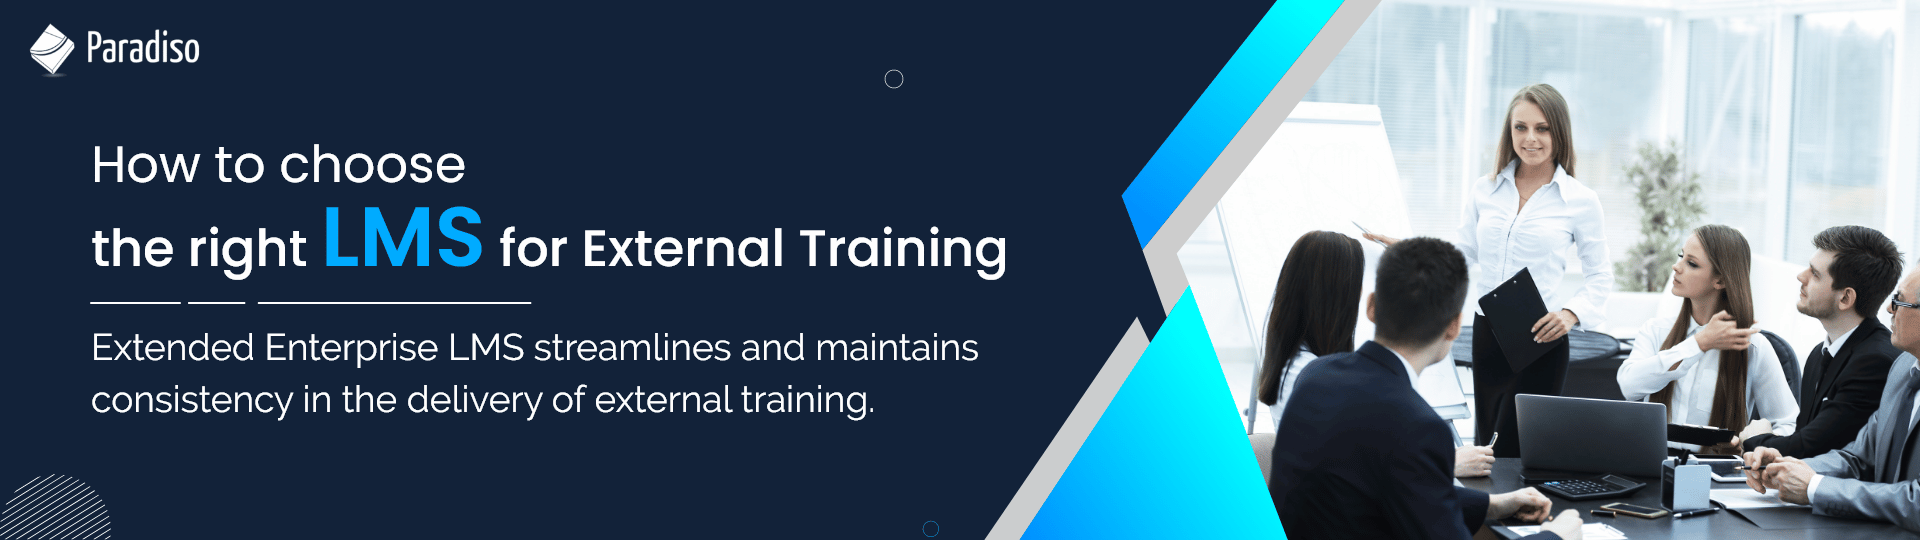 How to choose the right LMS for External Training